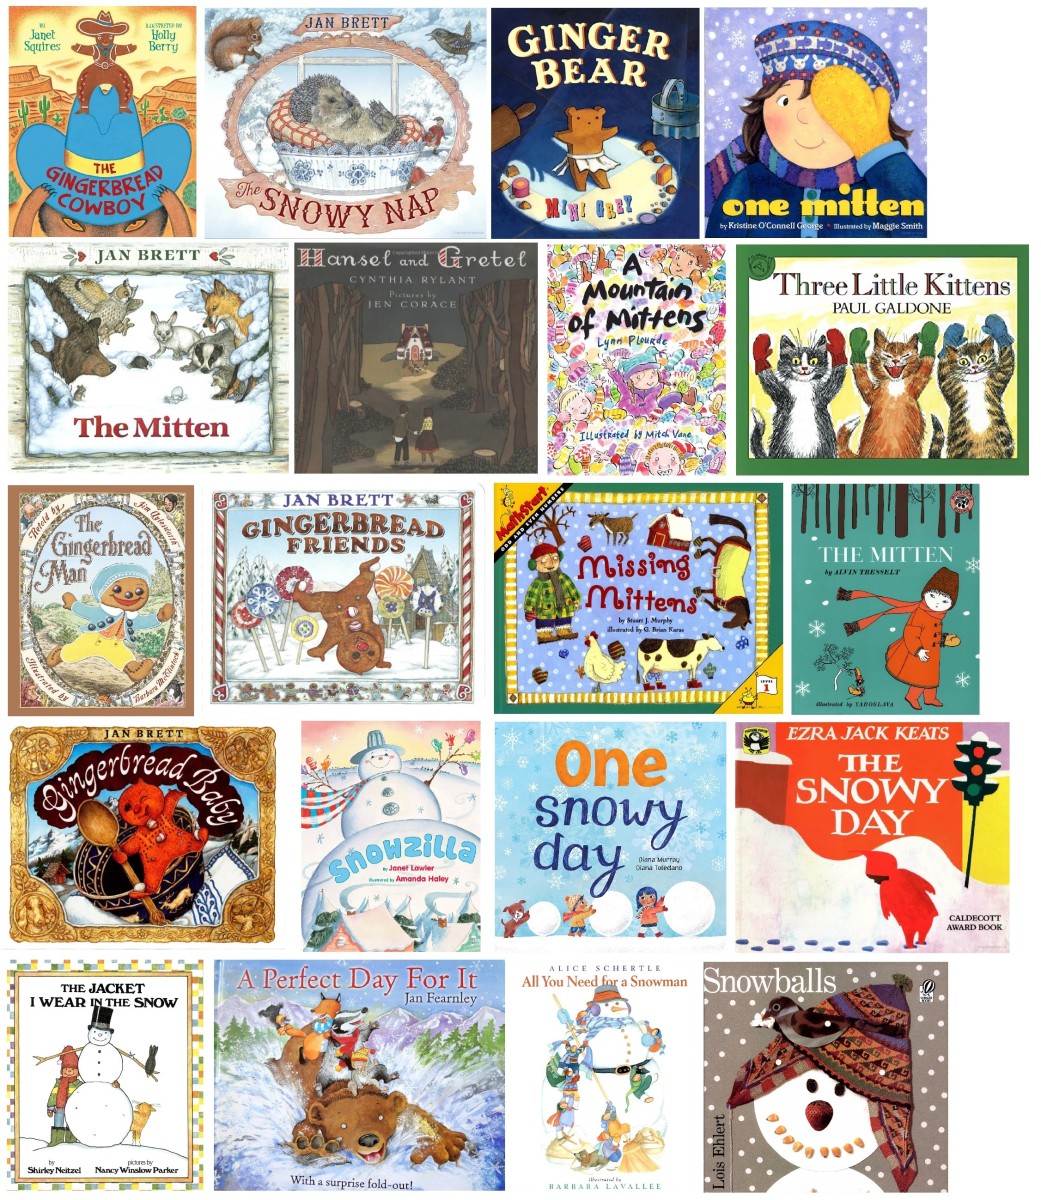 Children's books for December include plenty of gingerbread, snow, and mittens-themed books!